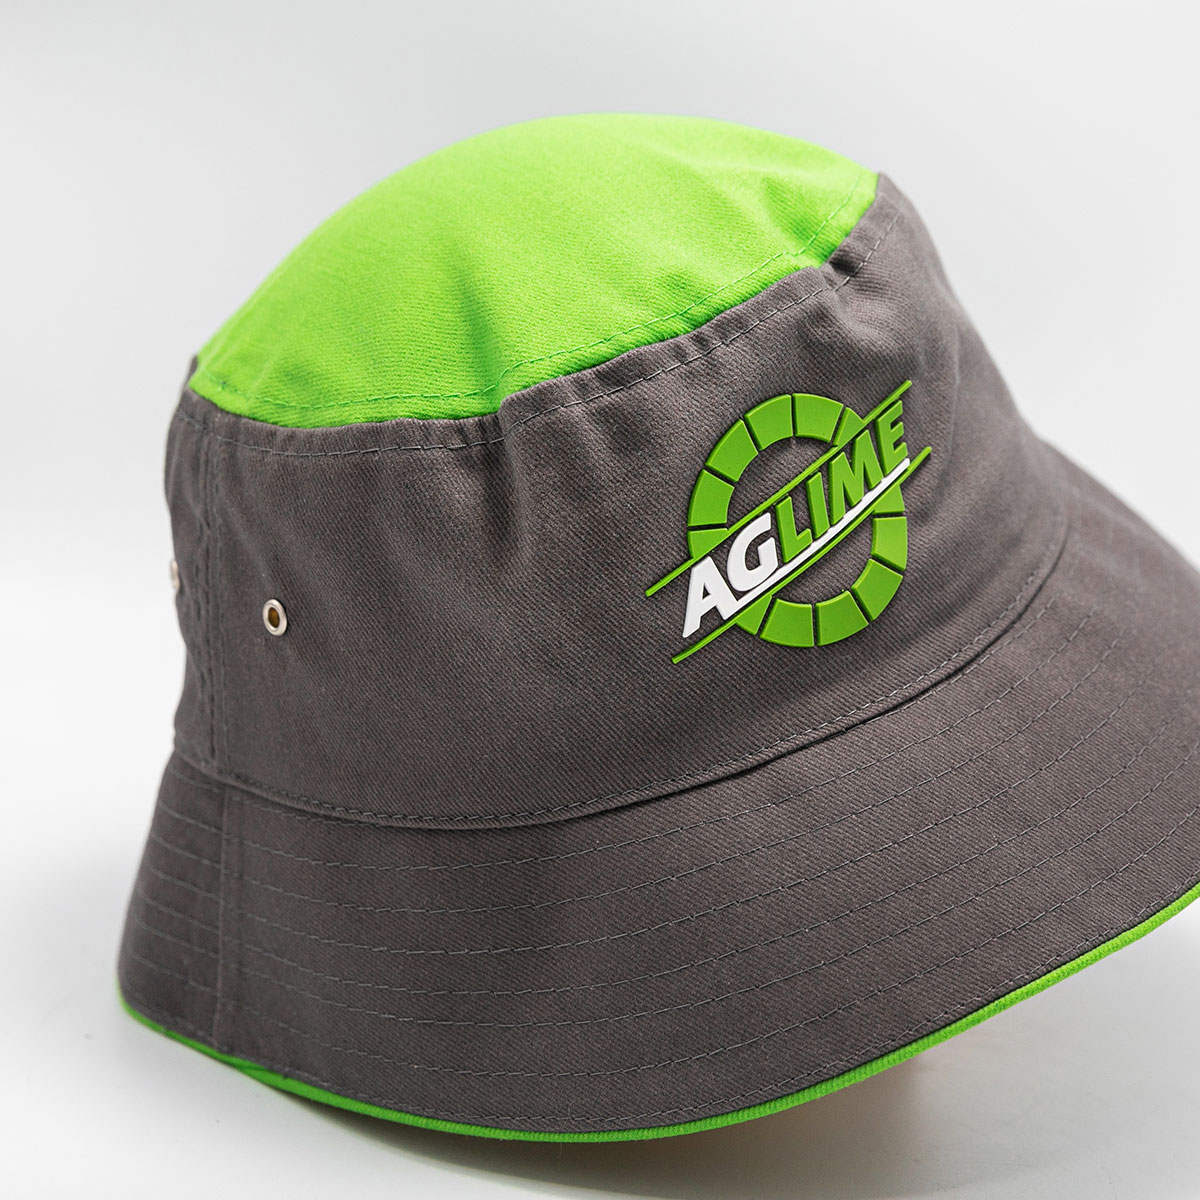 Headwear Slider Grey Bucket hat with Silicone front logo, metal eyelets, green top and trim detail